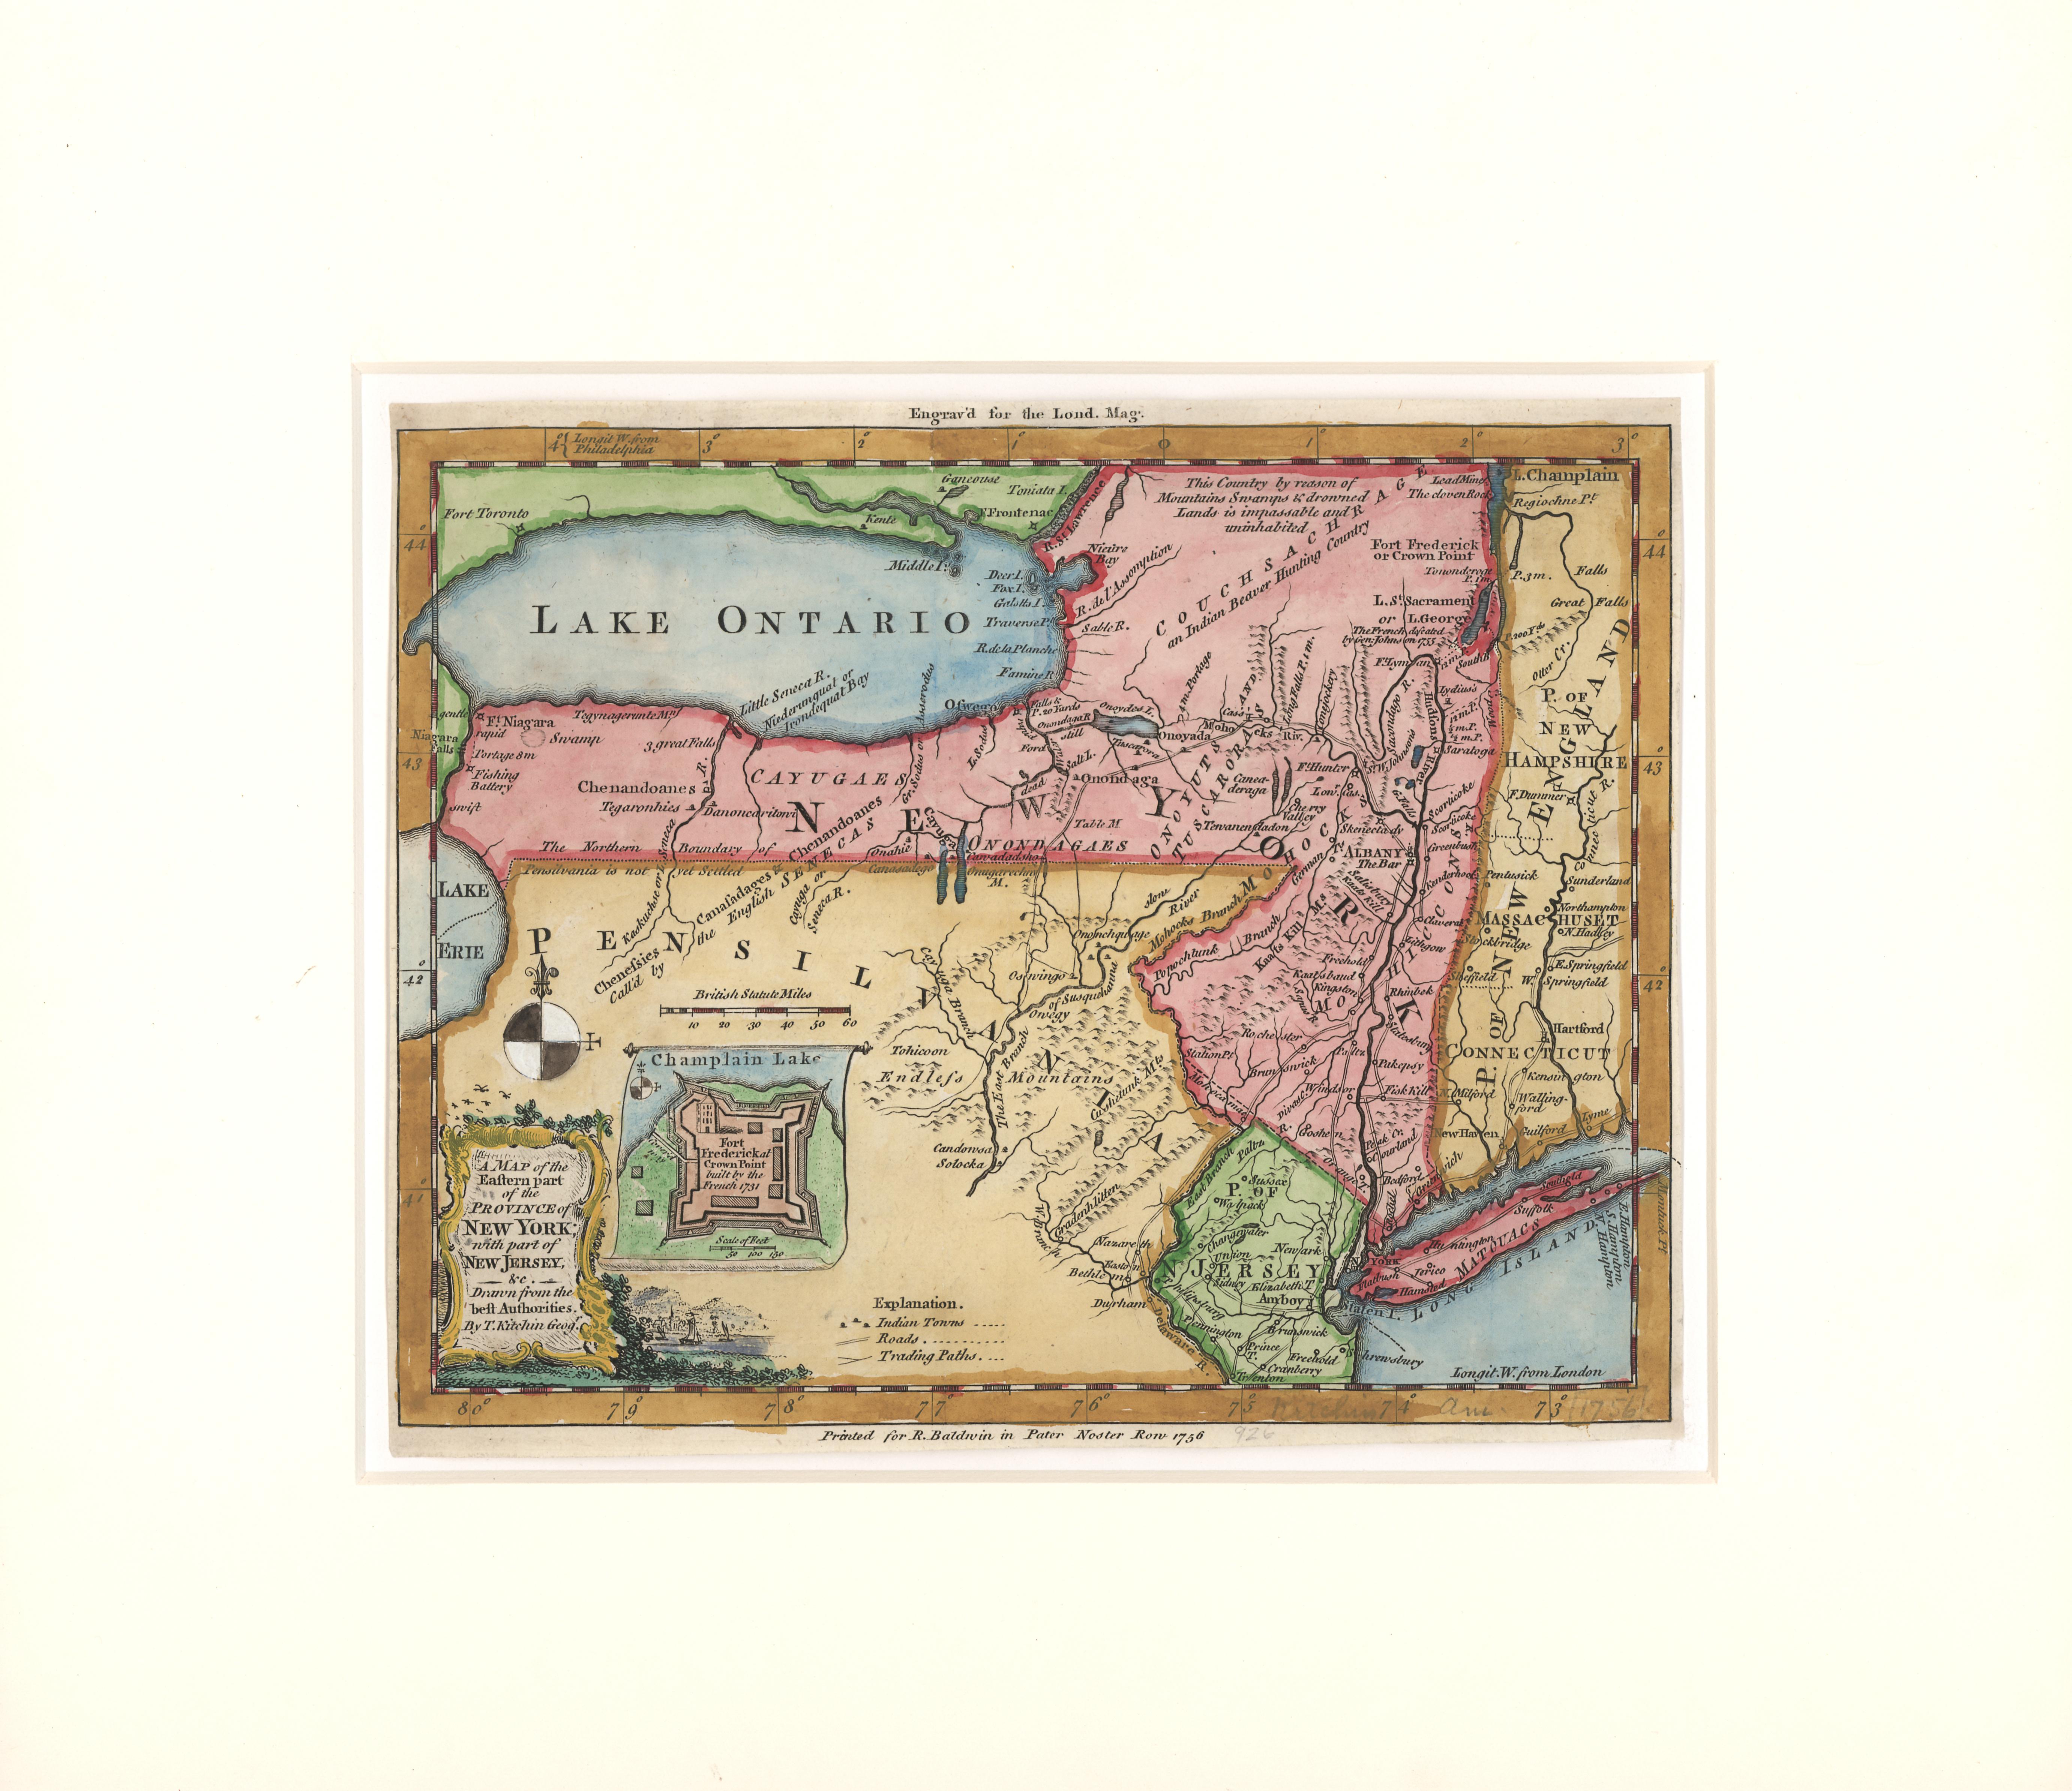 Thomas Kitchin Landscape Print - A Map of the Eastern Part of the Province of New York with part of New Jersey...